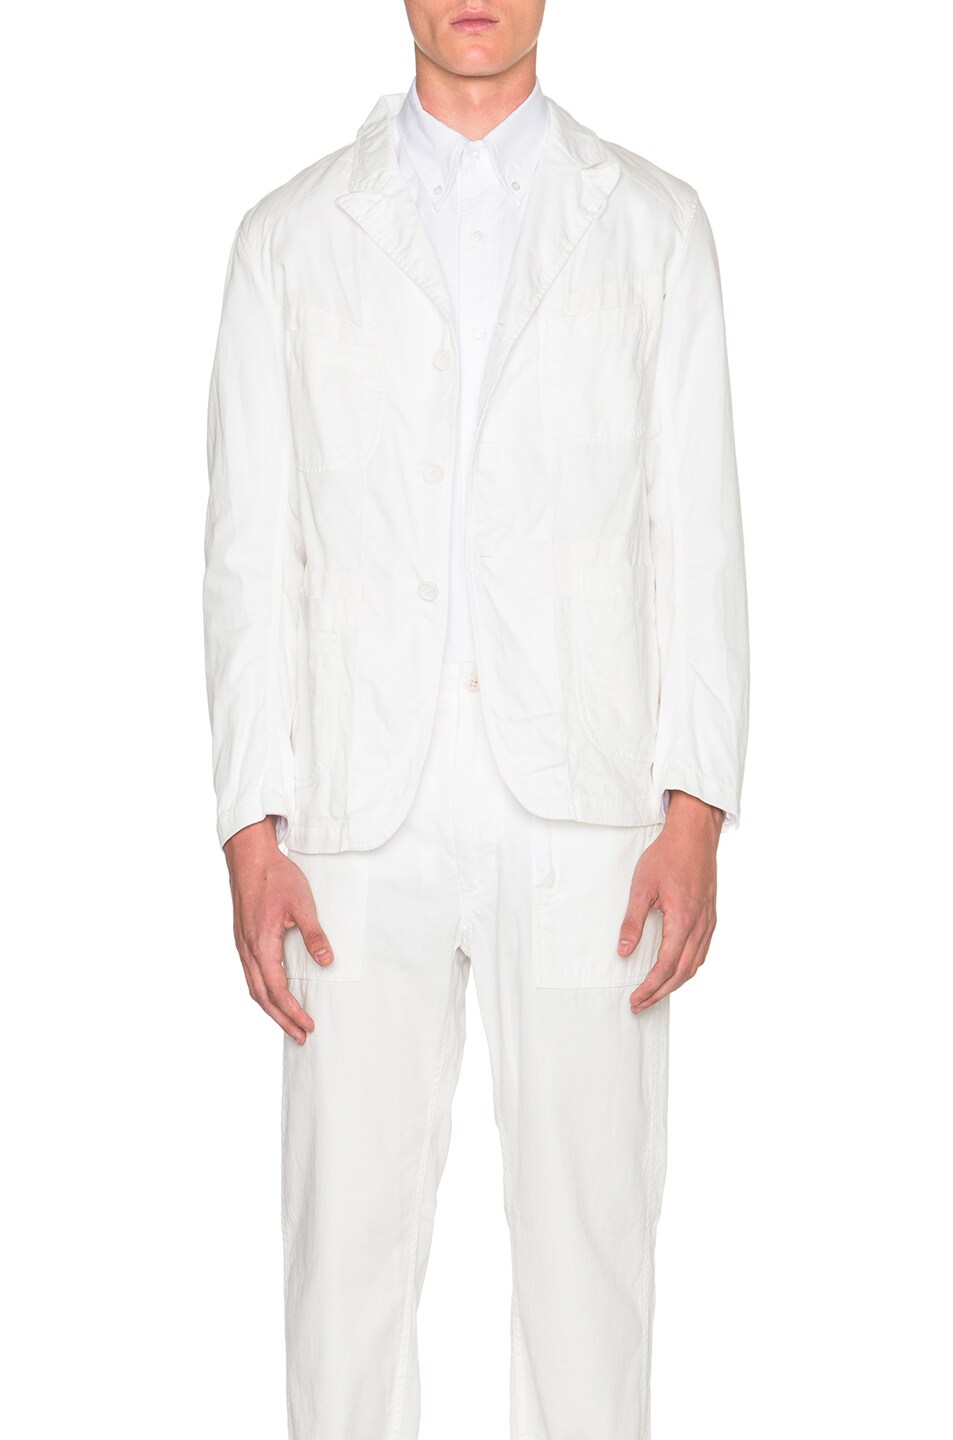 Image 1 of Engineered Garments Bedford Jacket in White Cotton Twill